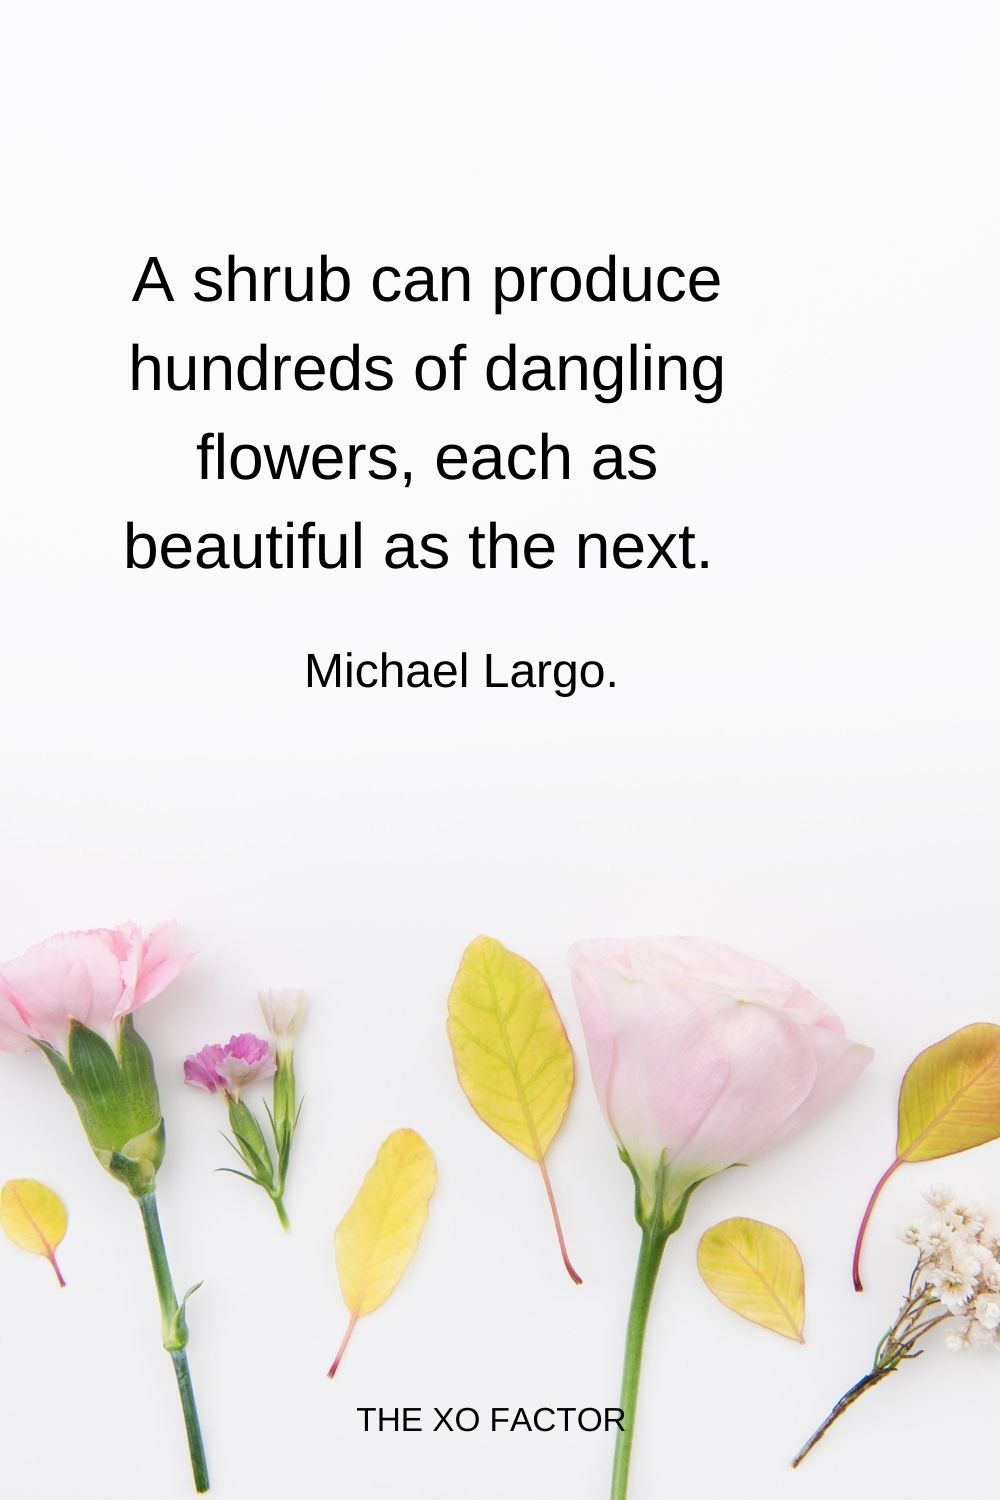 A shrub can produce hundreds of dangling flowers, each as beautiful as the next.  Michael Largo.